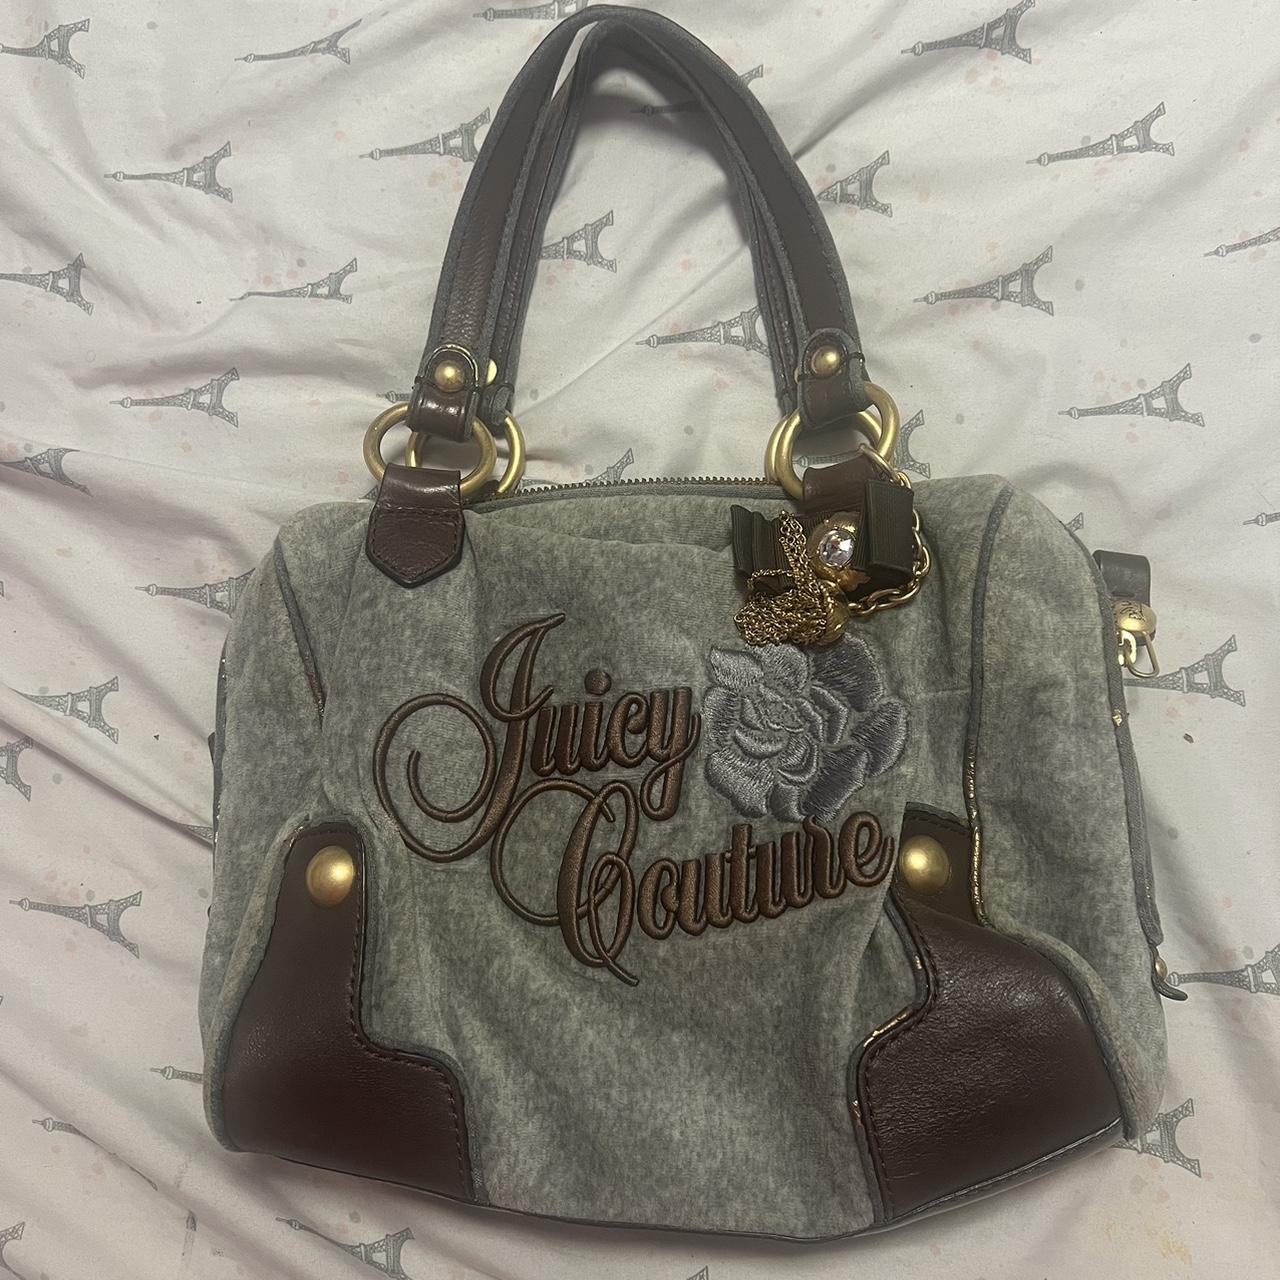 old juicy couture bag BUY AT OWN RISK - as far as i... - Depop